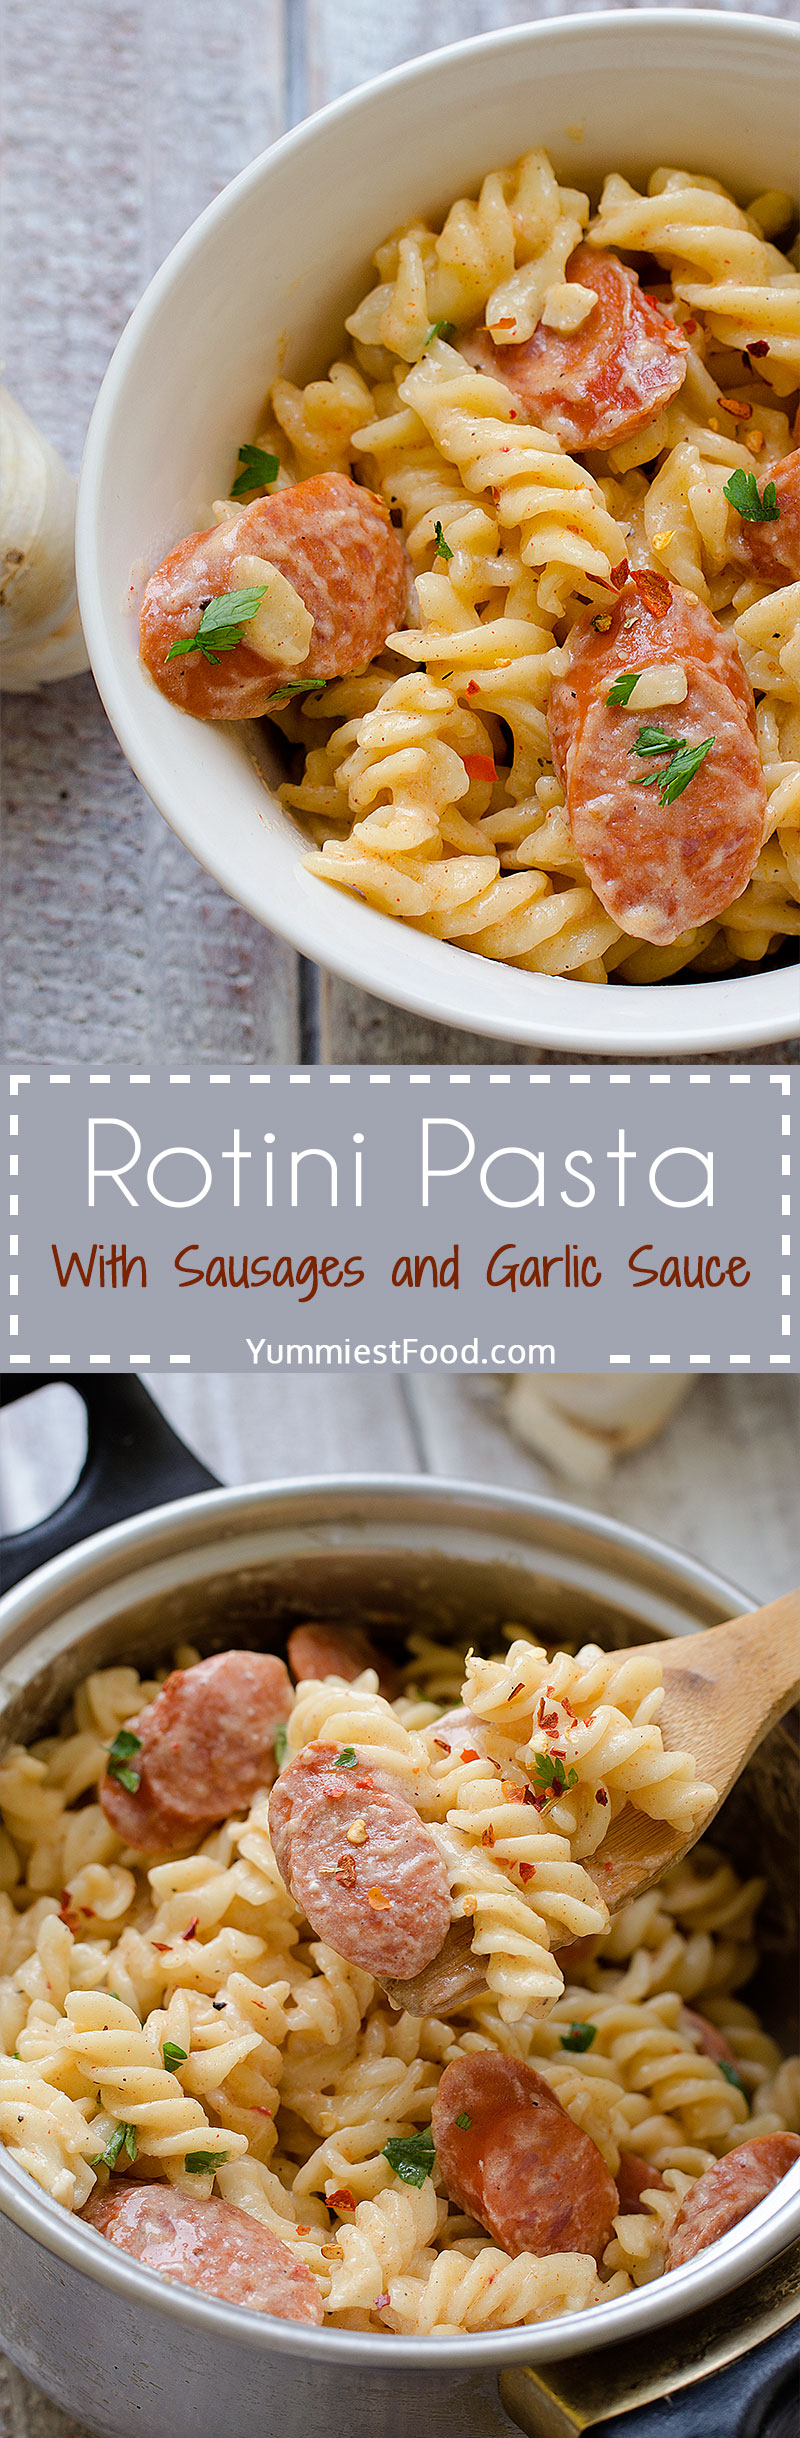 Delicious Rotini Pasta with sausages and garlic sauce